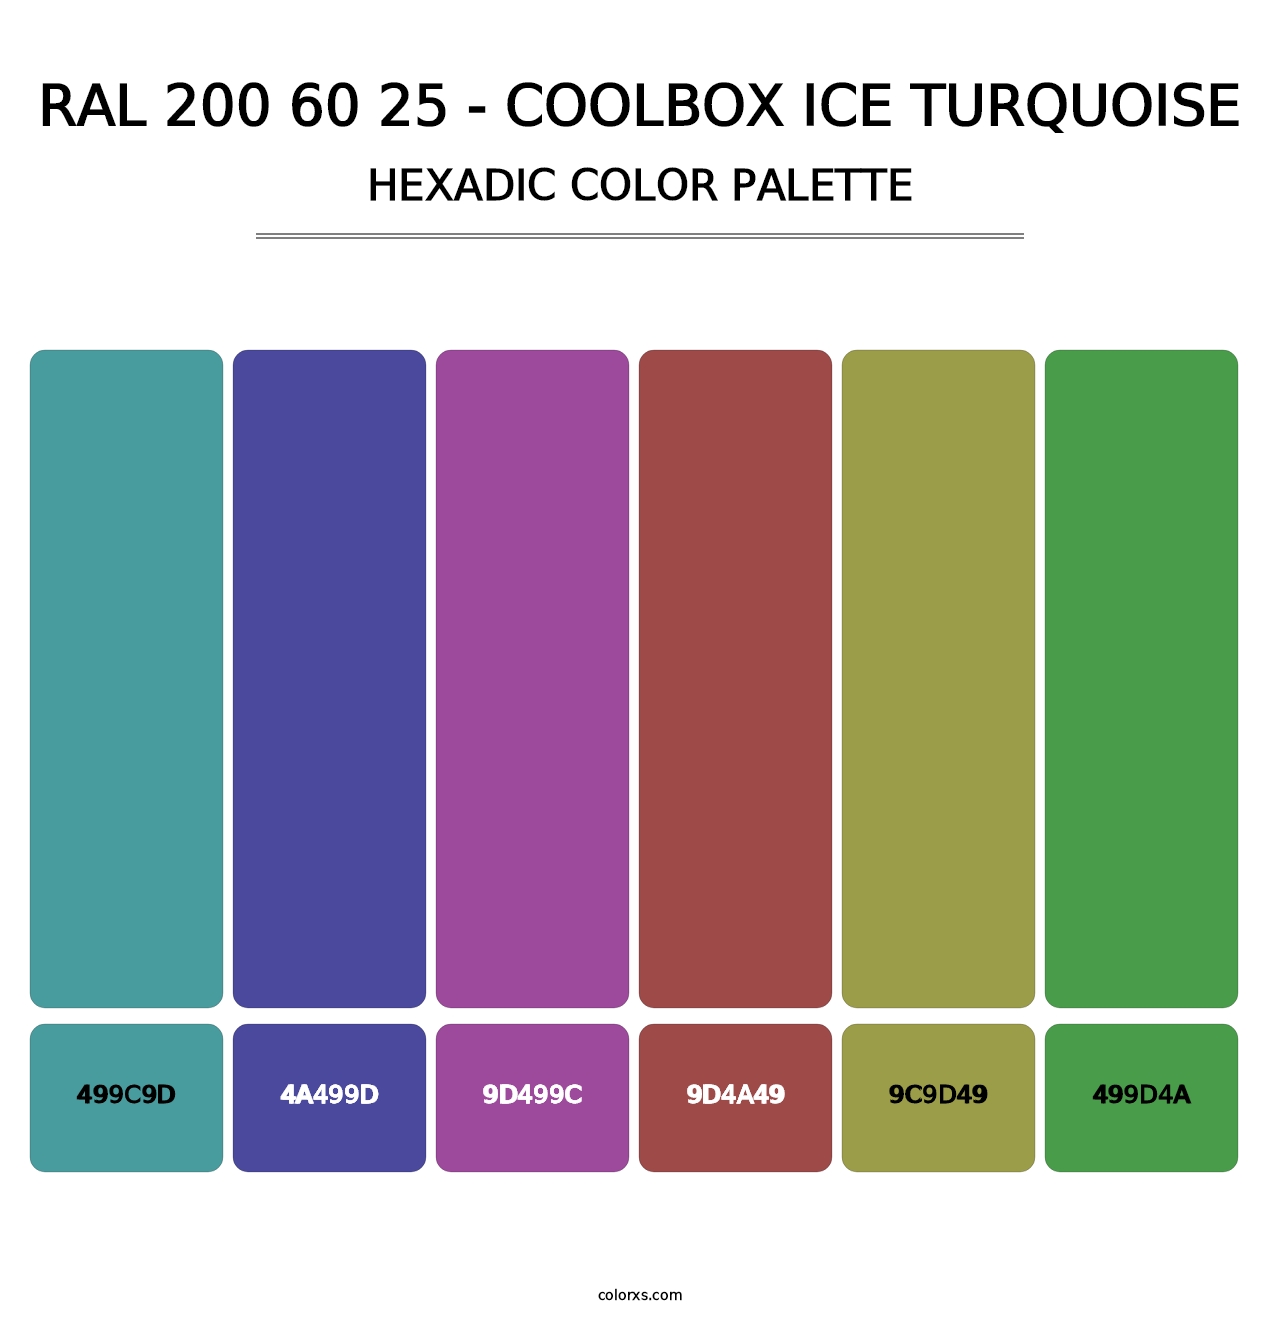 RAL 200 60 25 - Coolbox Ice Turquoise - Hexadic Color Palette